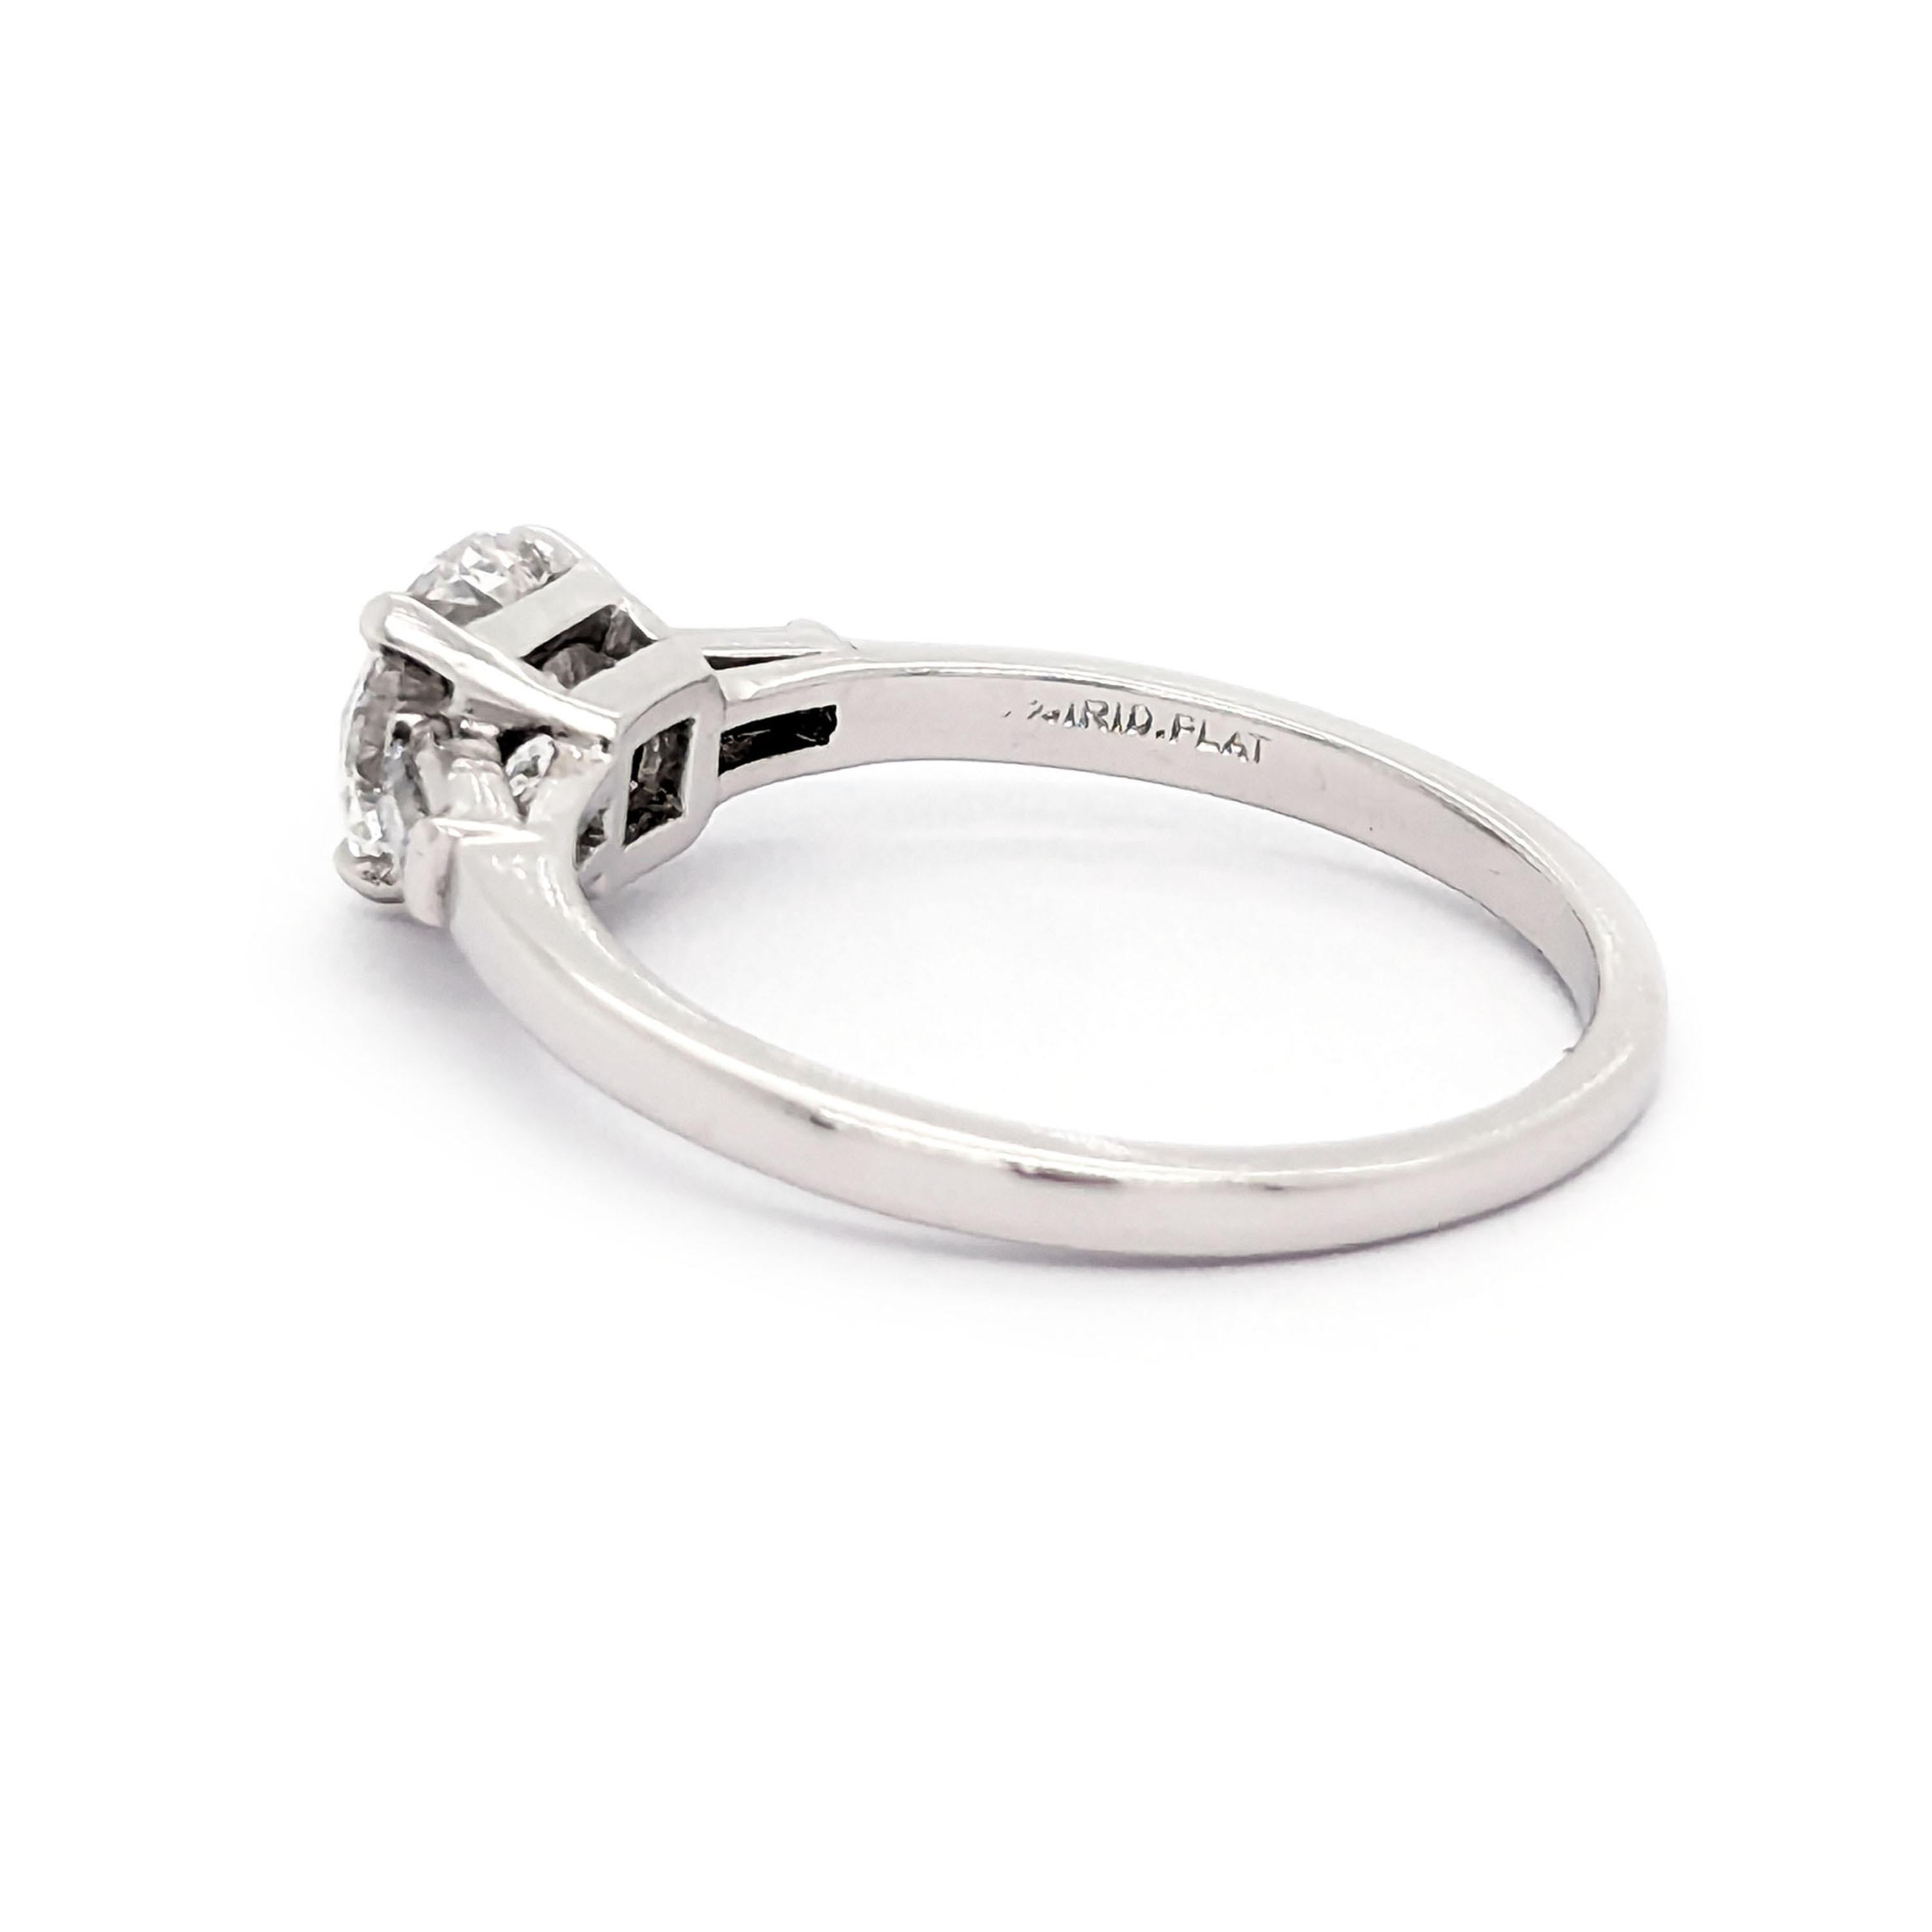 Vintage Solitaire Diamond and Platinum Ring, 0.81 Carats, Circa 1940 For Sale 2